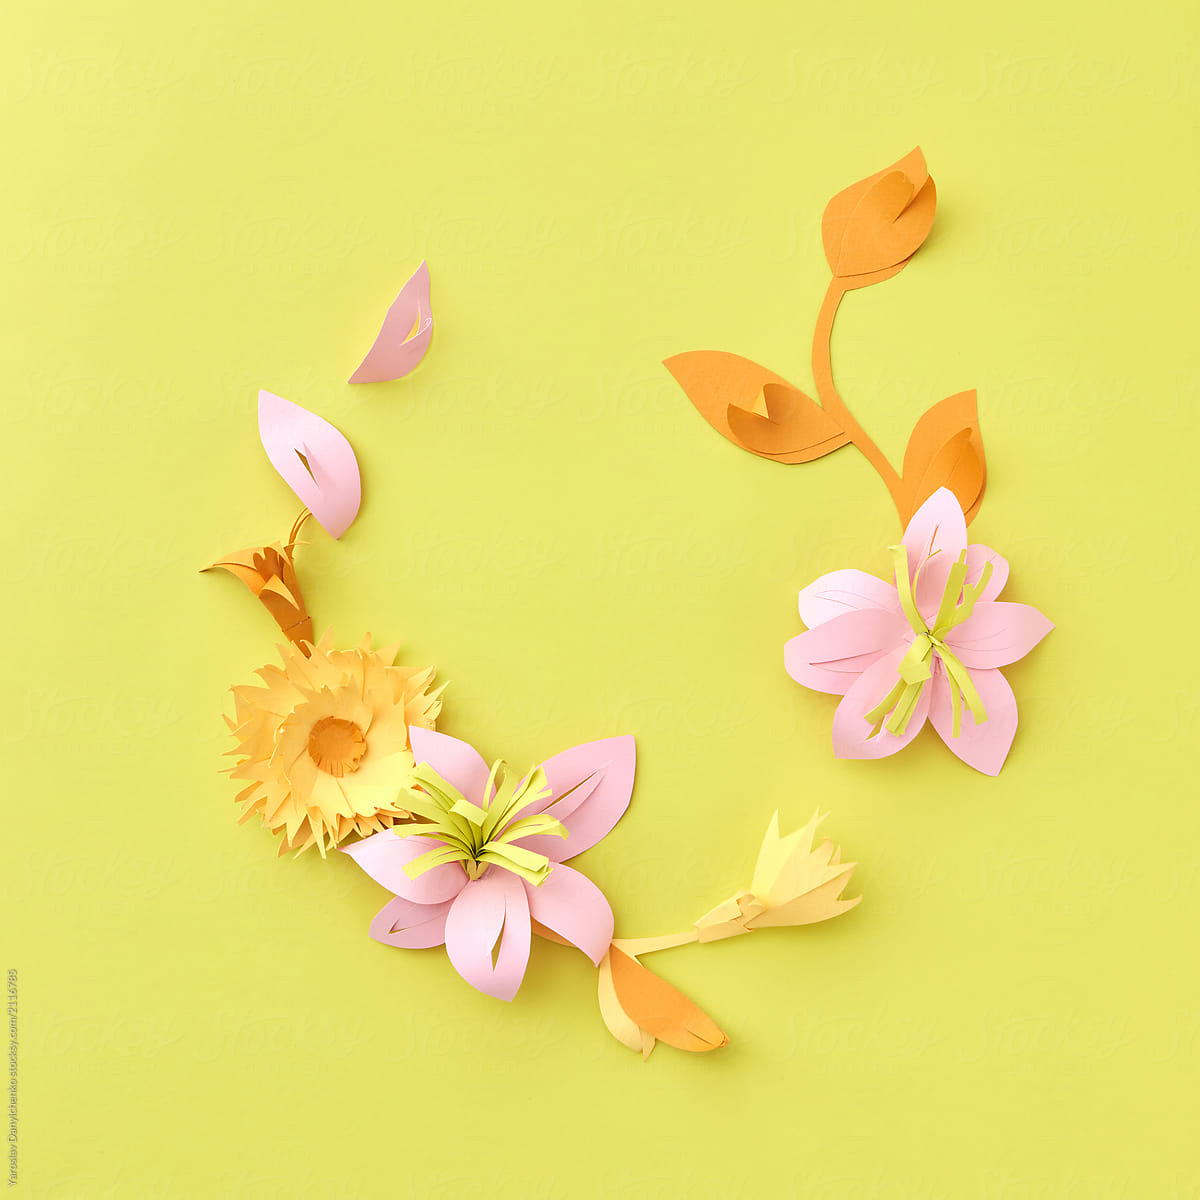 Colofrul handmade paper flowers on yellow background. Paper craf